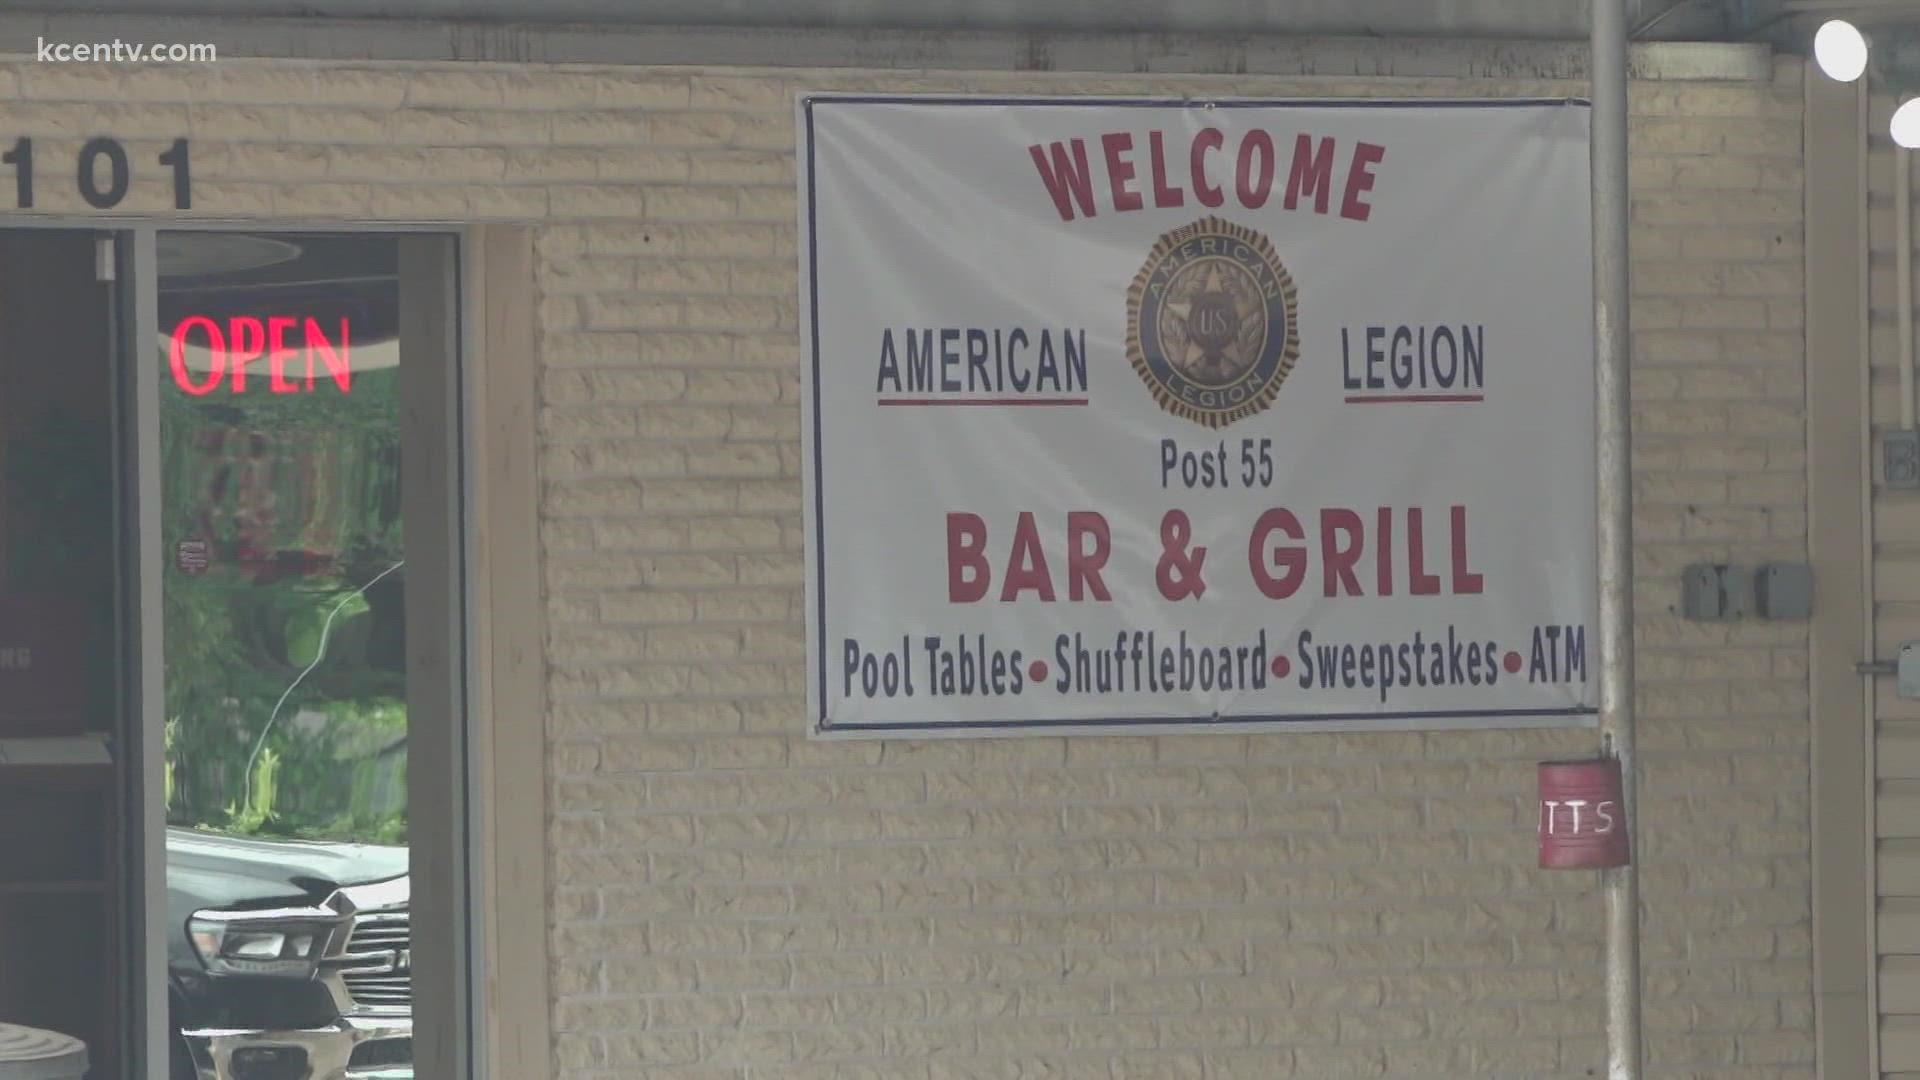 American Legion Post 55 is back in full swing after the COVID pandemic nearly shut them down in 2020.